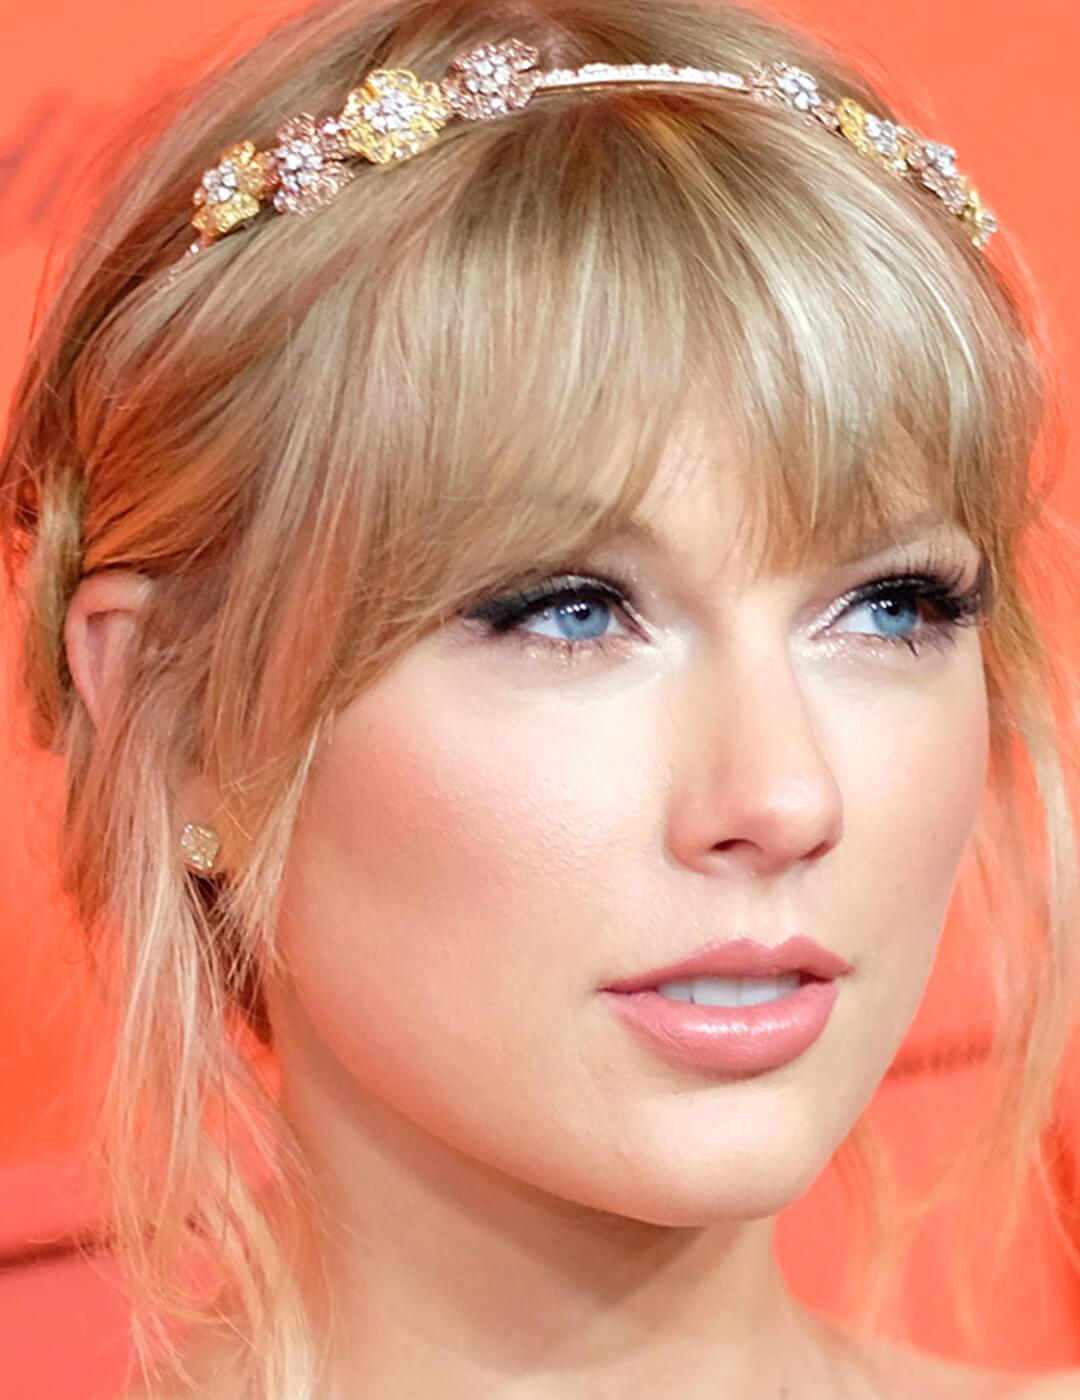 A photo Taylor Swift with a floral headband and pink blush and lip color